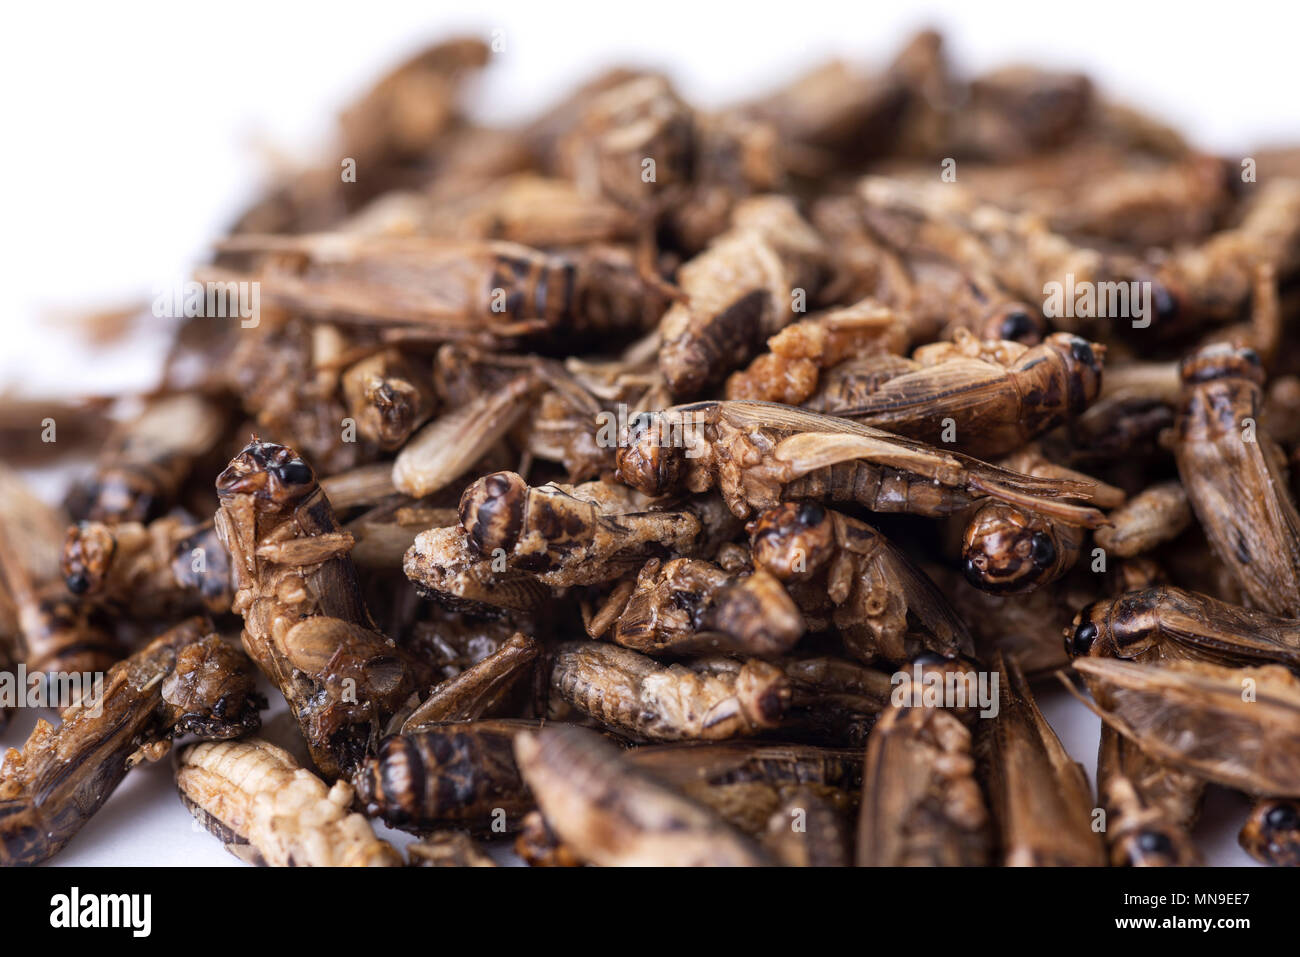 closeup of some fried crickets seasoned with onion and barbecue sauce Stock Photo